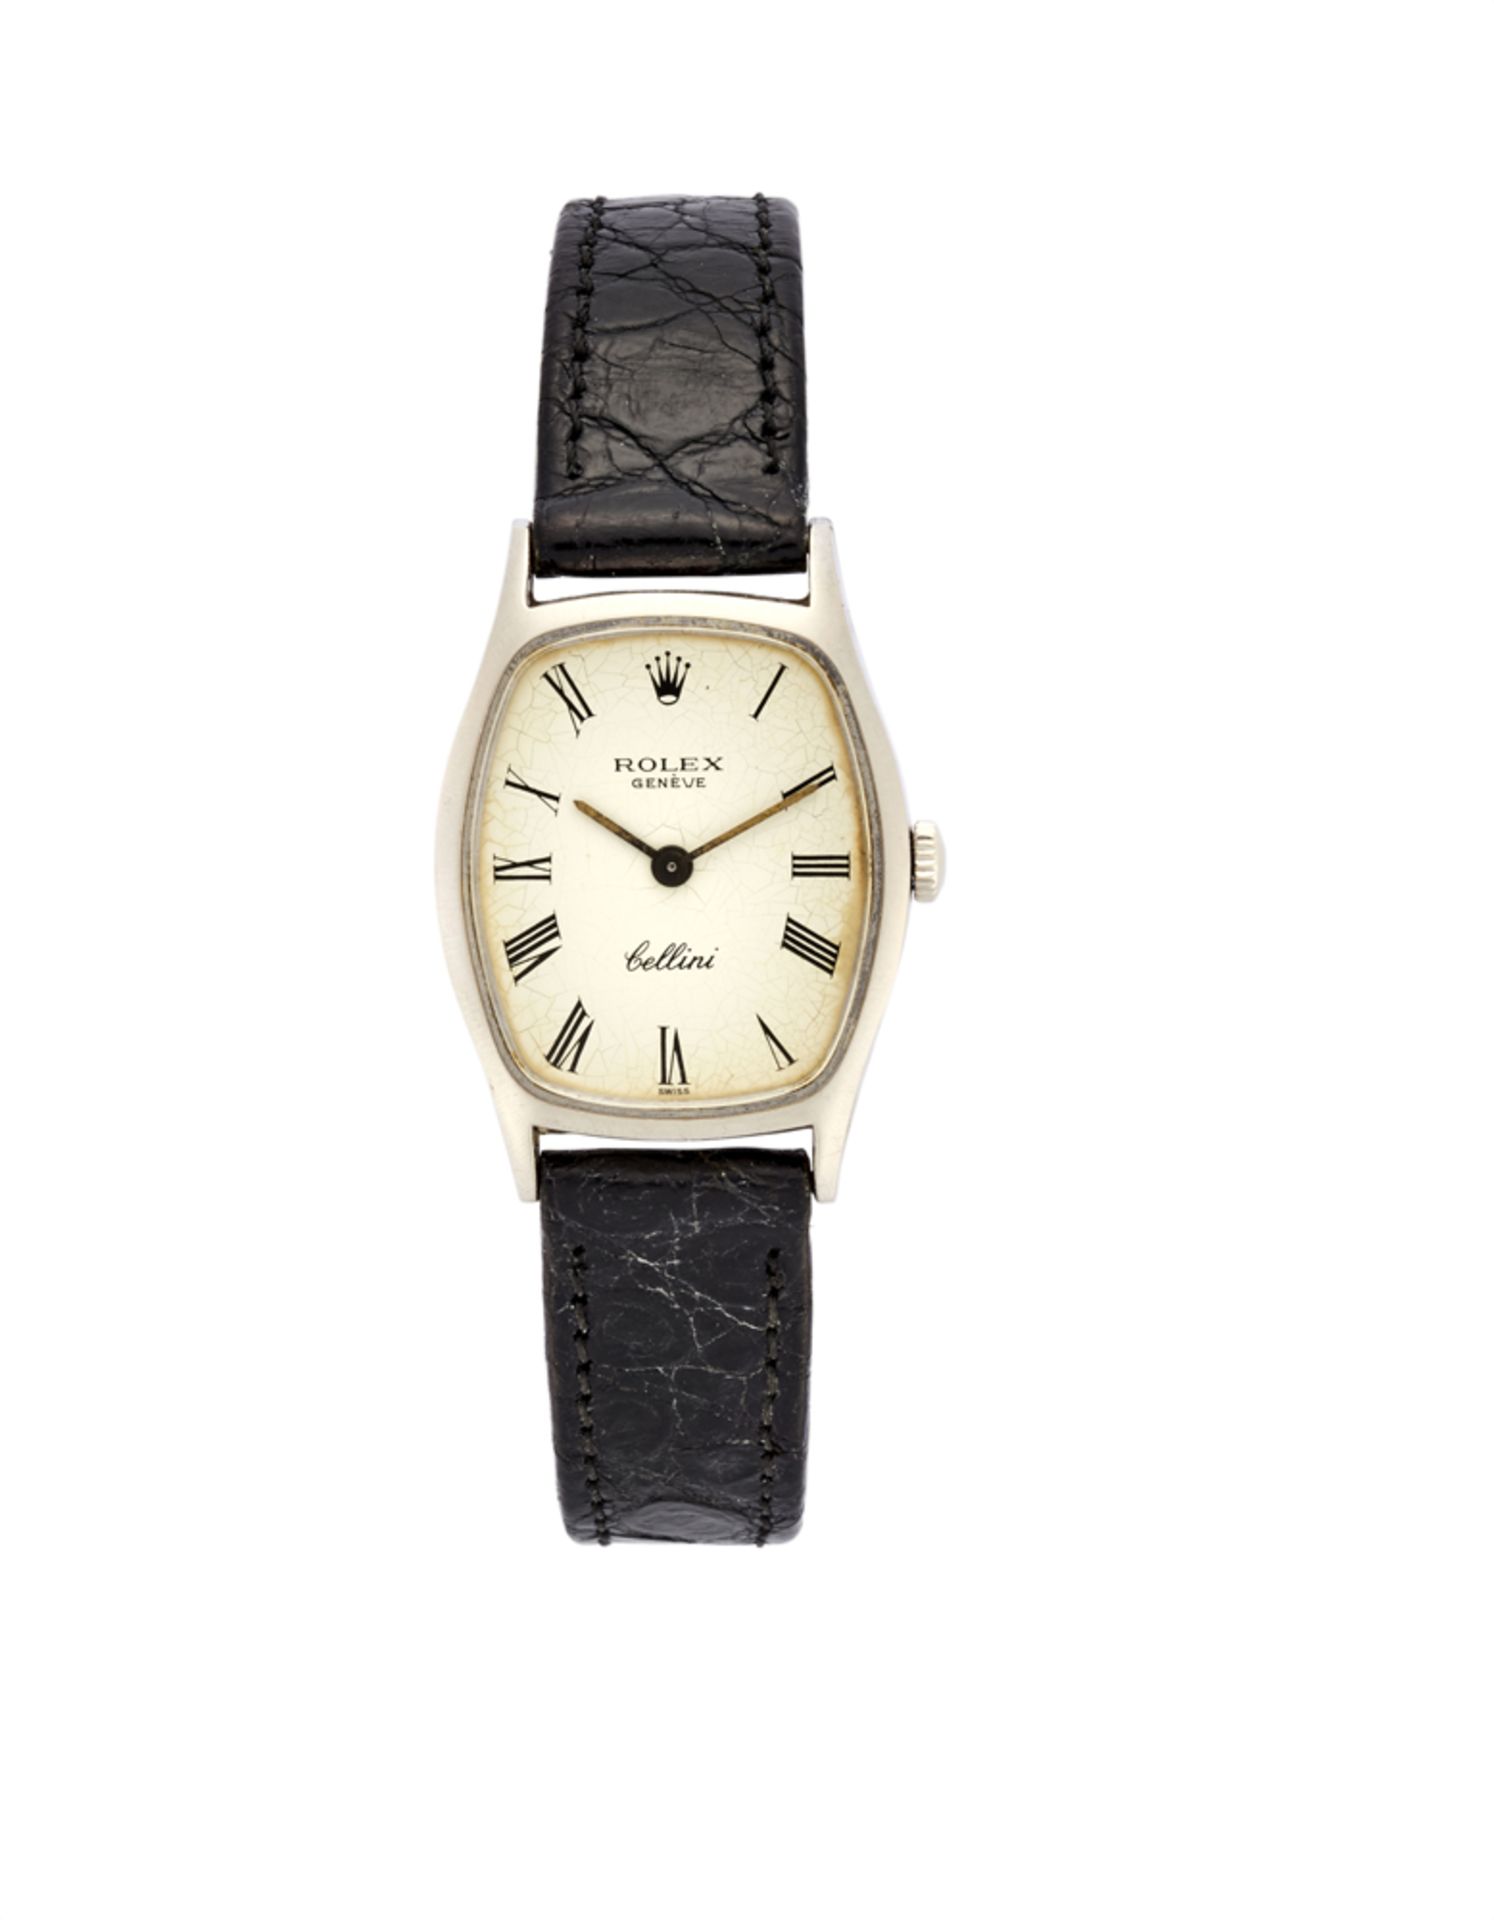 ROLEX CELLINI<br>Lady's 18K gold wristwatch<br>1970s<br>Dial, movement and case signed<br>Manual-win